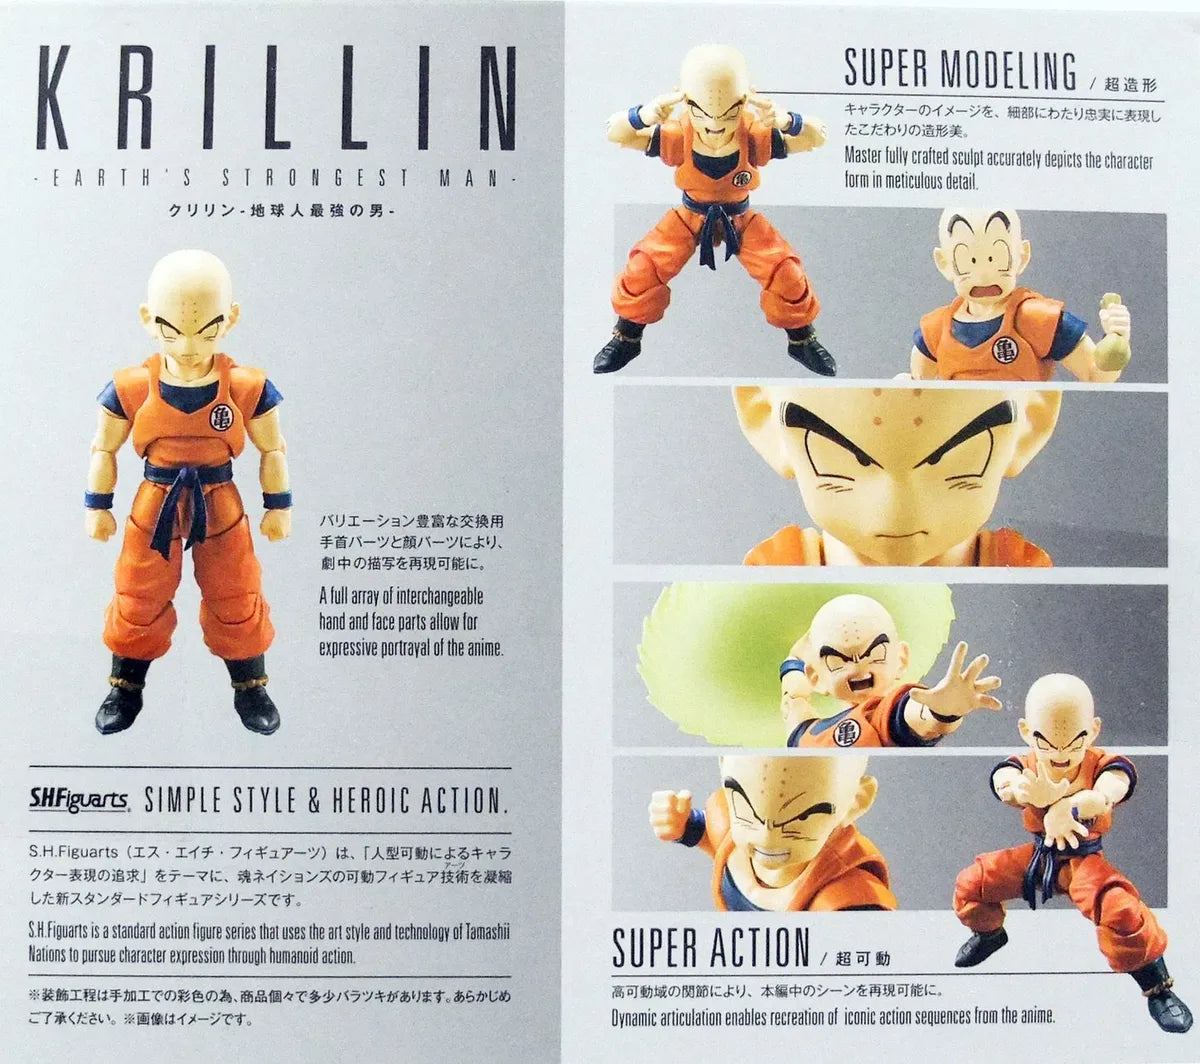 S.H. Figuarts Dragon Ball Z Krillin Earth's Strongest Man Action Figure Back View of Box